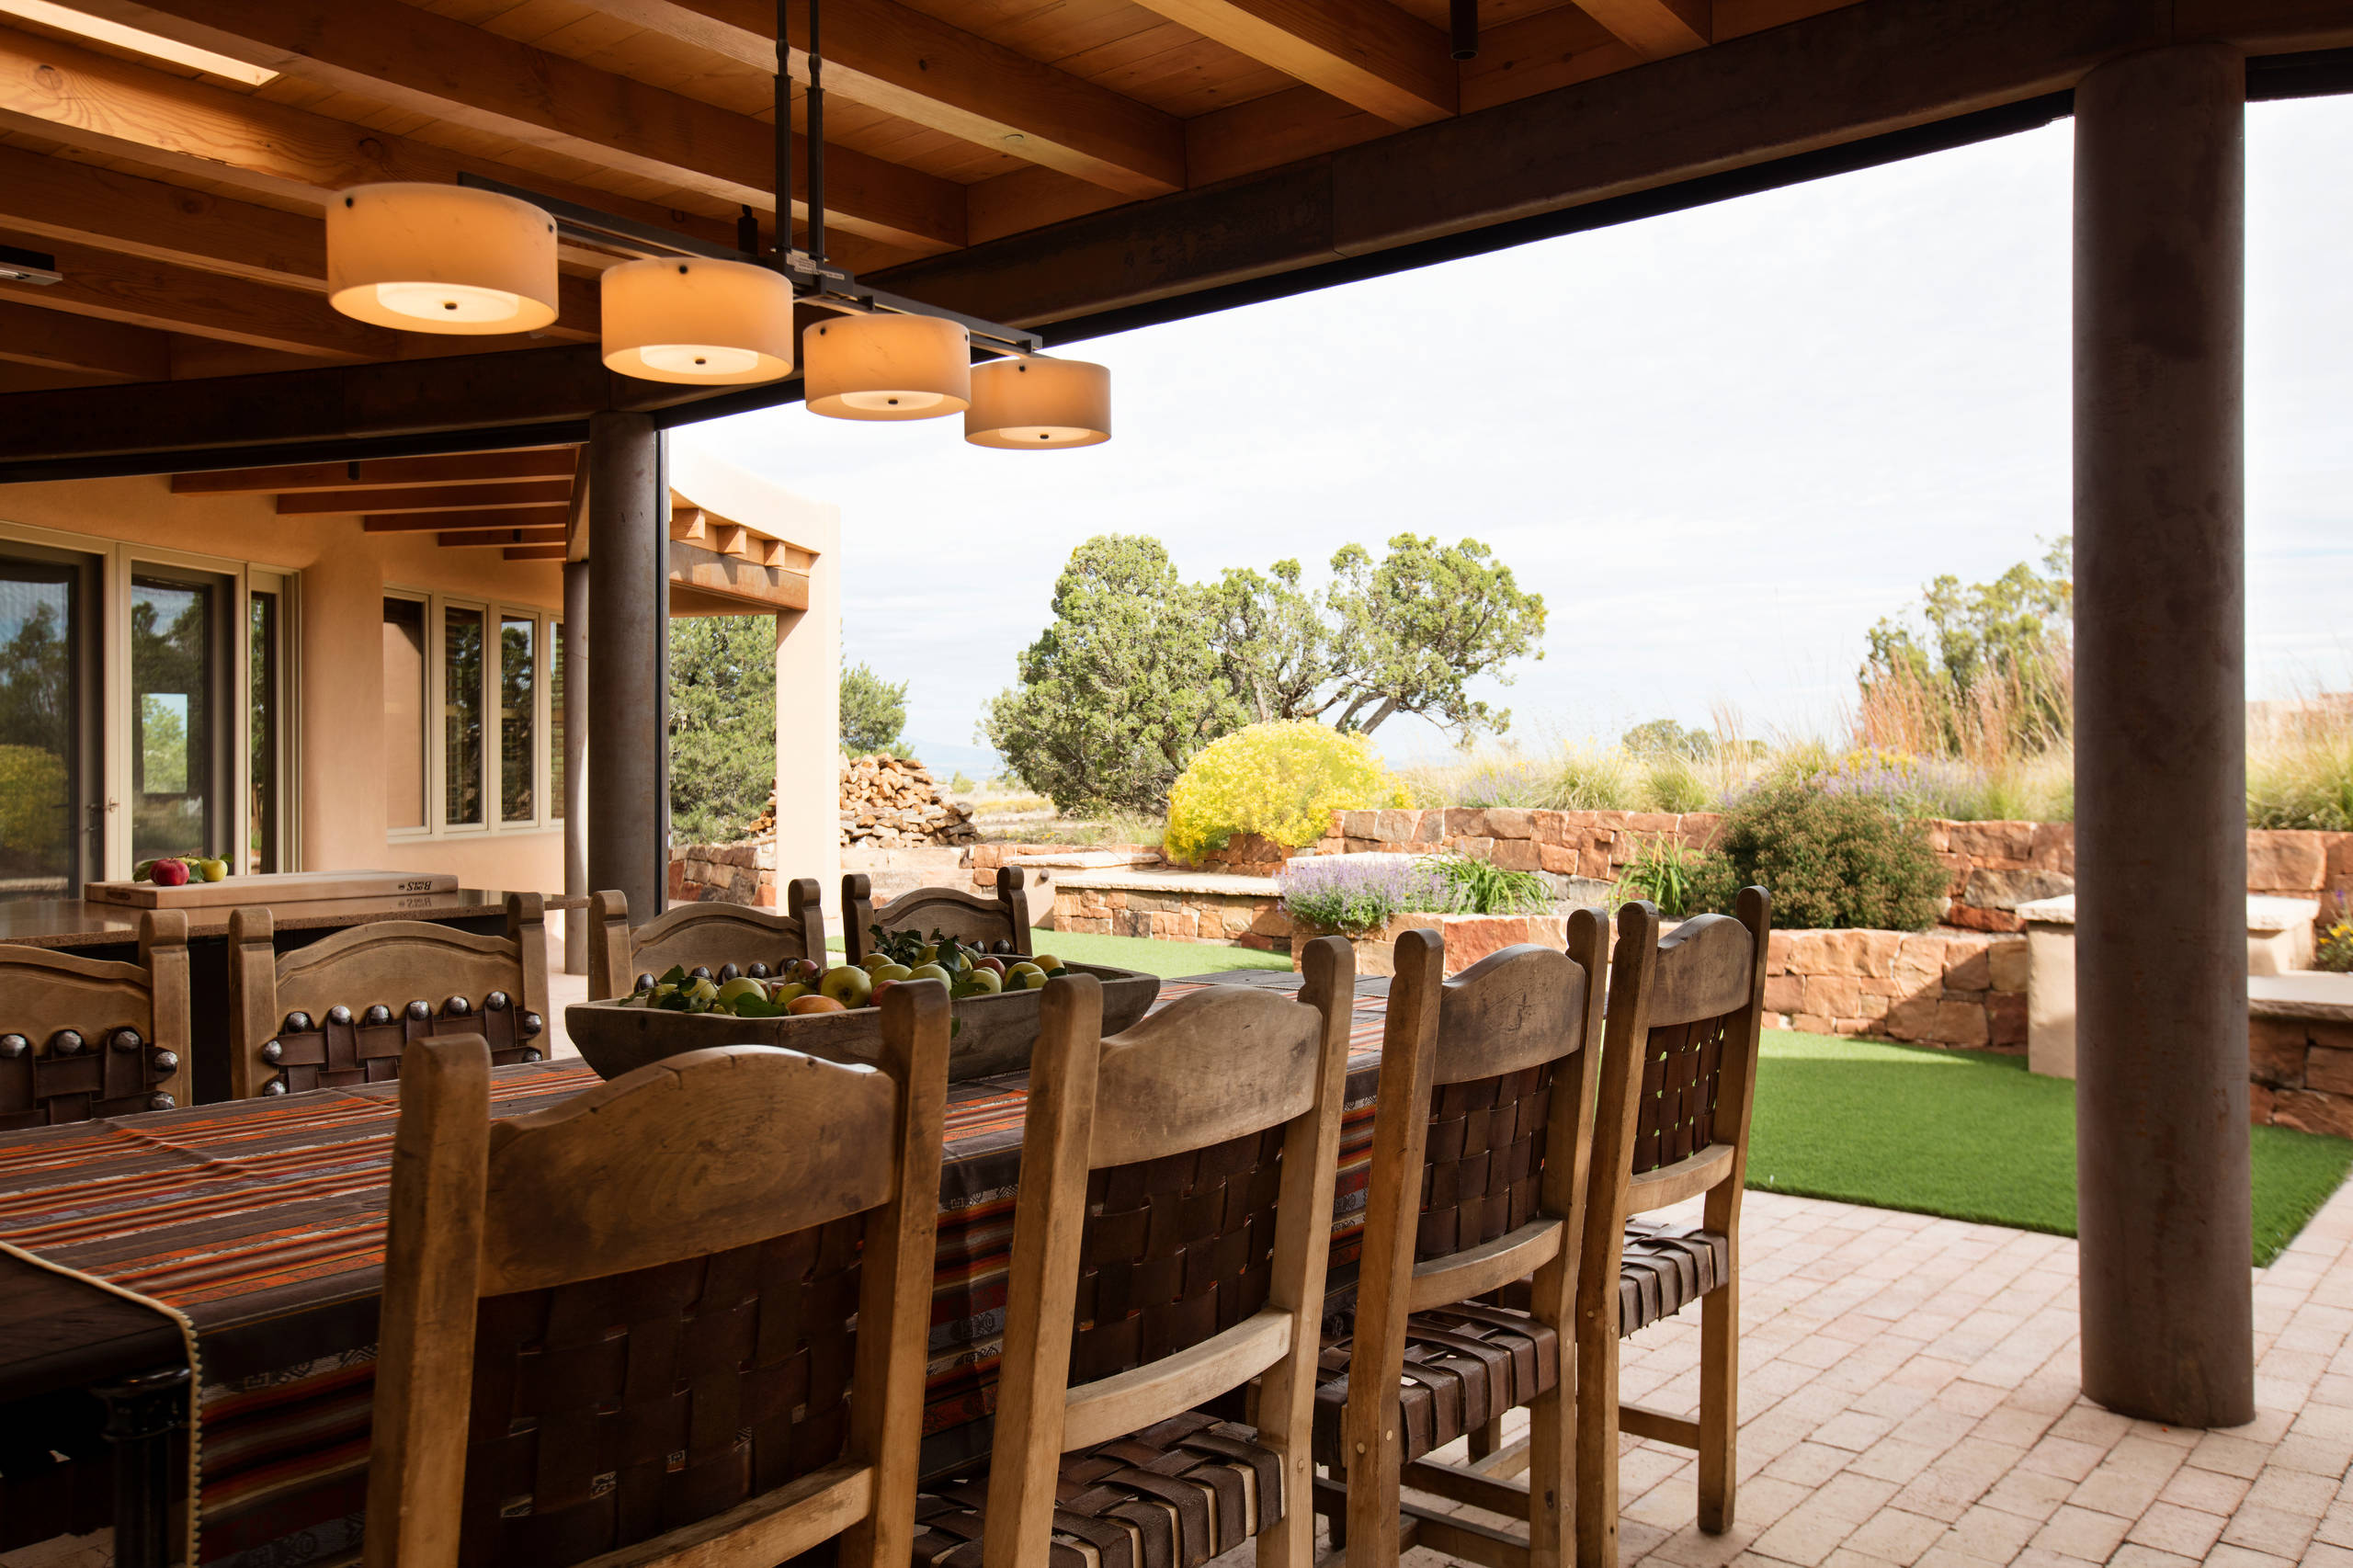 Room with a View: Outdoor Lounge and Kitchen